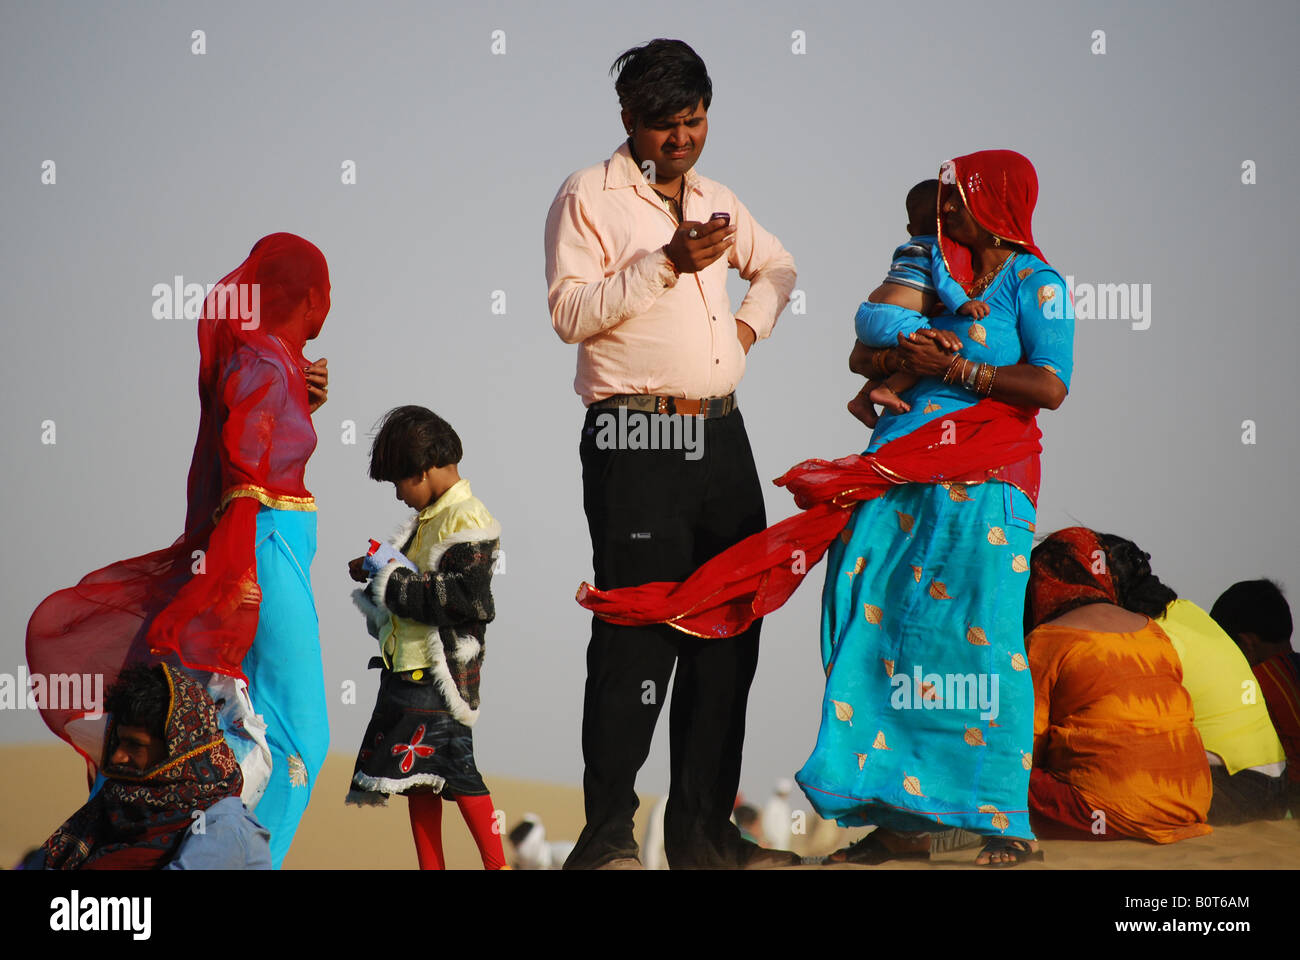 An Indian man in modern clothing checks his mobile phone surrounded by women in traditional garments at the Camel Festival in Th Stock Photo